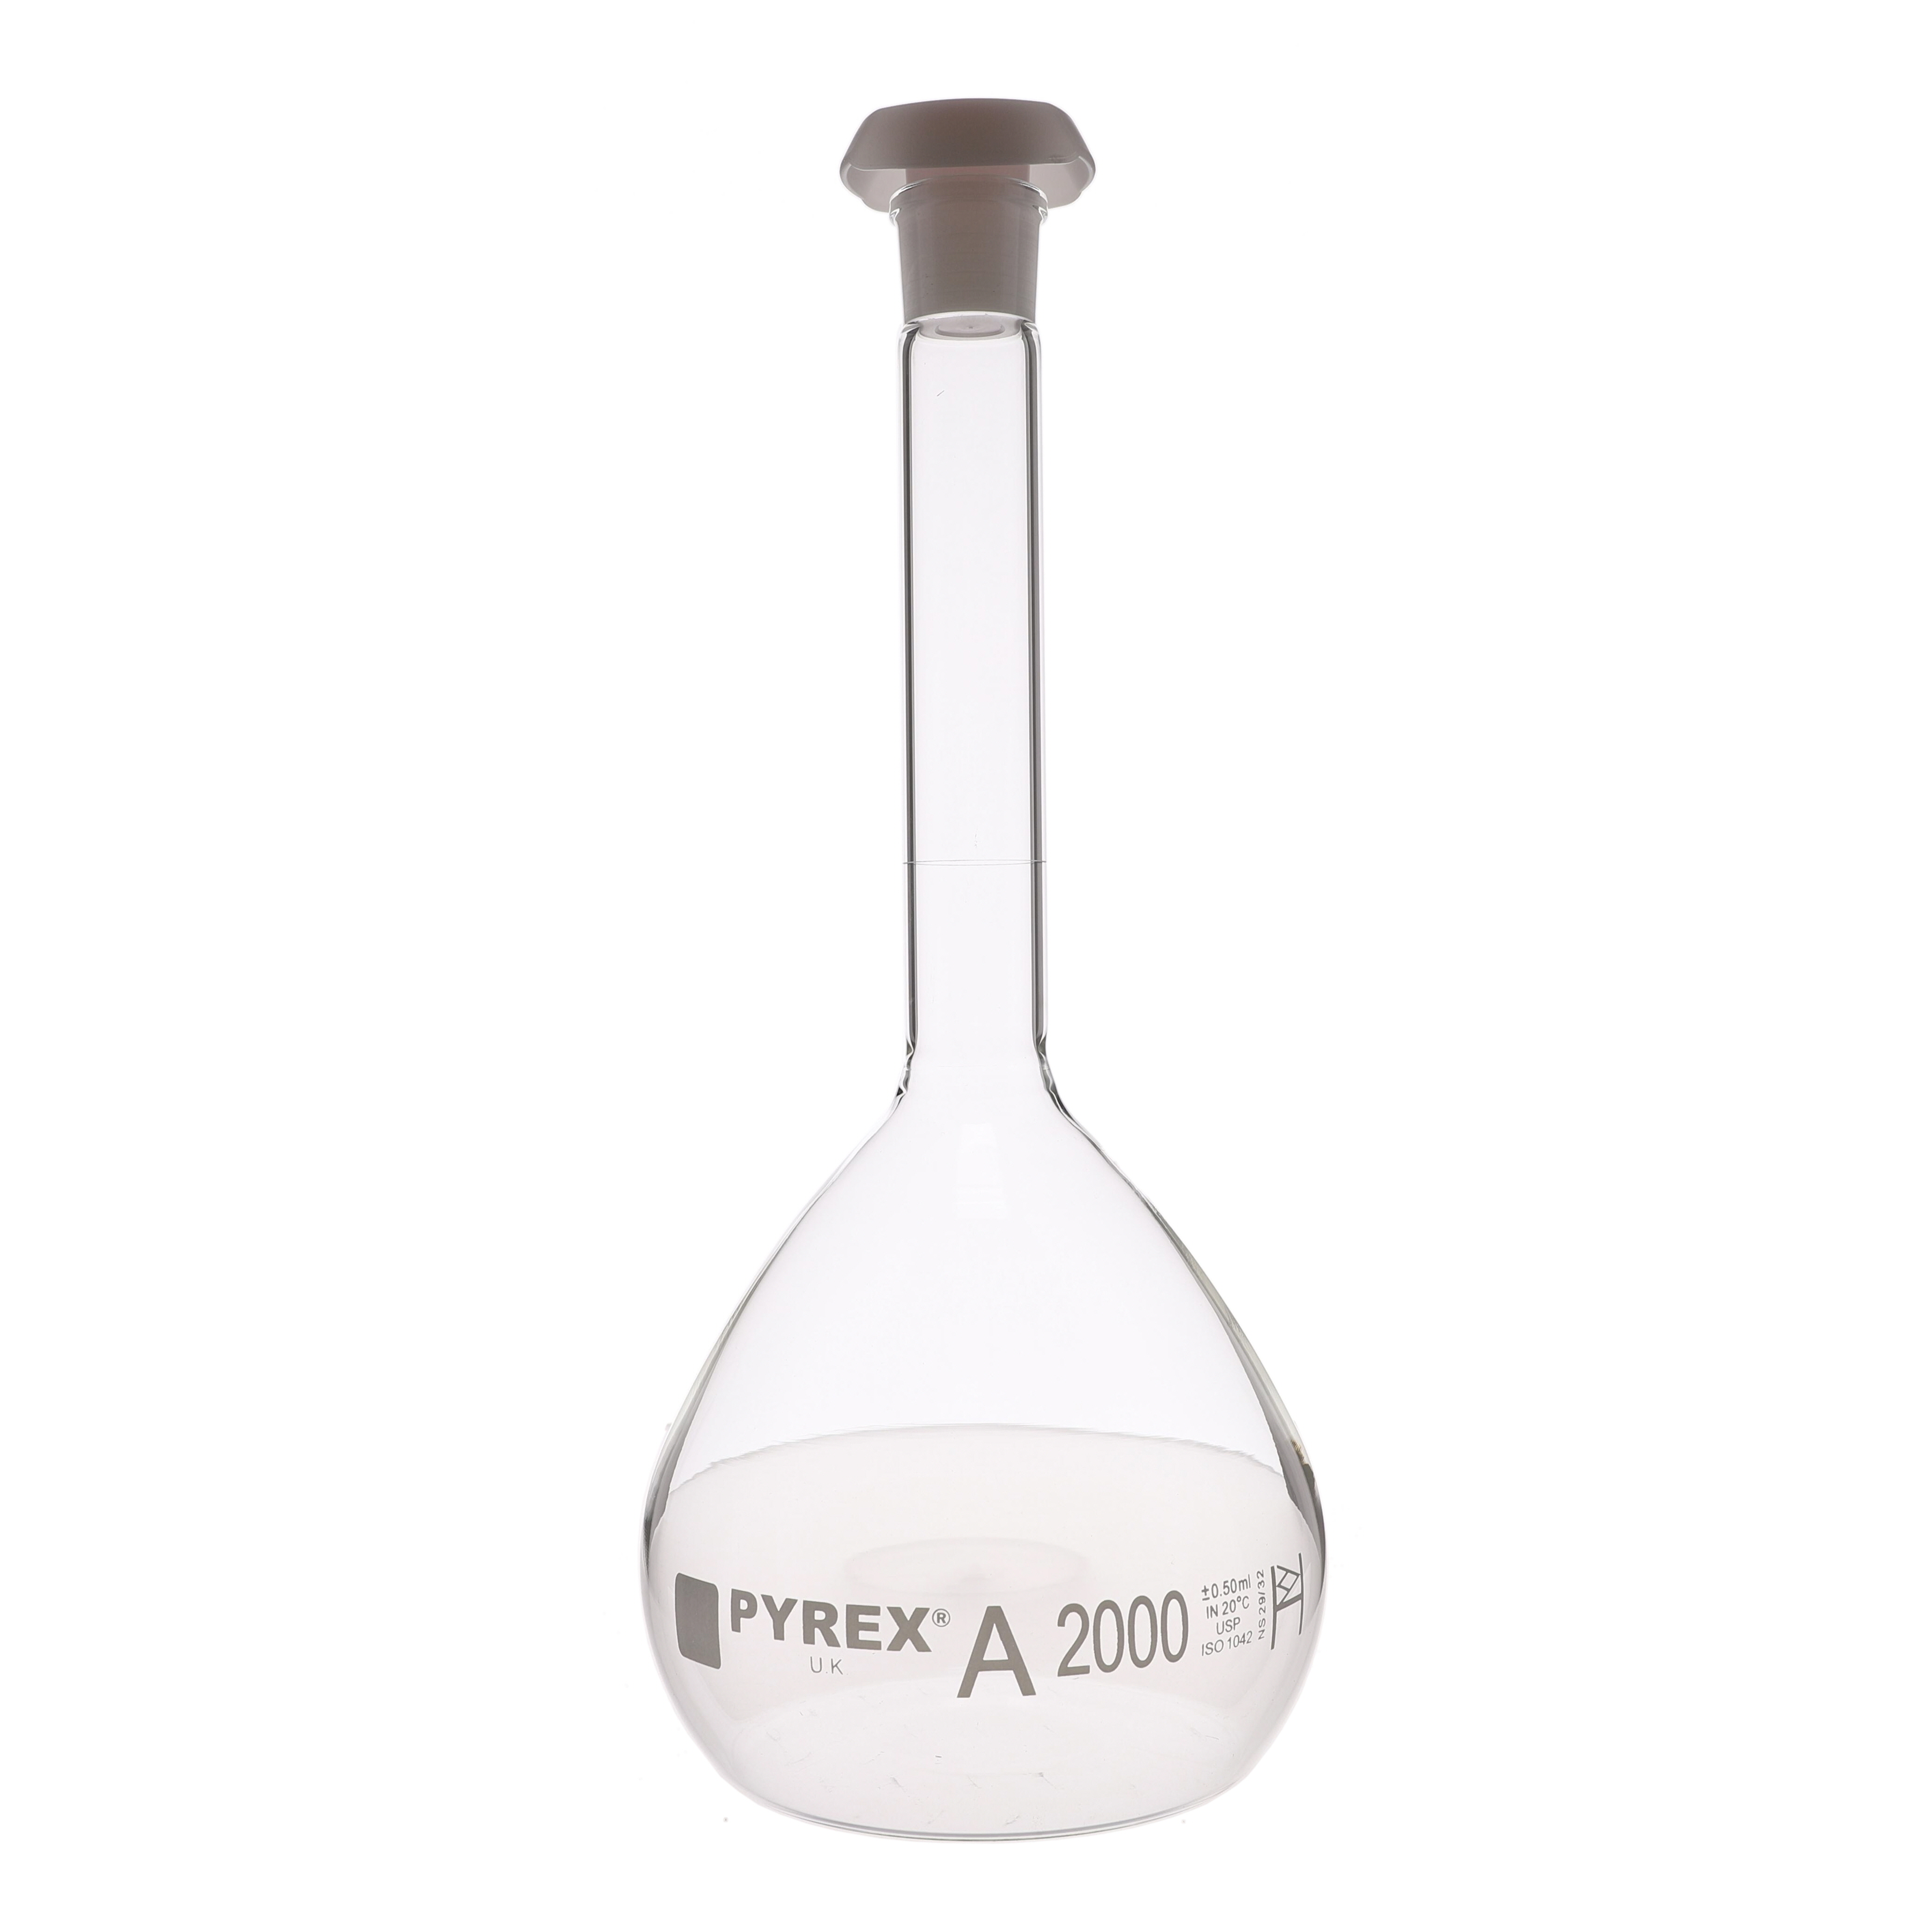 Corning Pyrex Borosilicate Glass Class A Certified and Serialized Volumetric Flasks with Glass Standard Taper Stopper 2000ml Capacity 